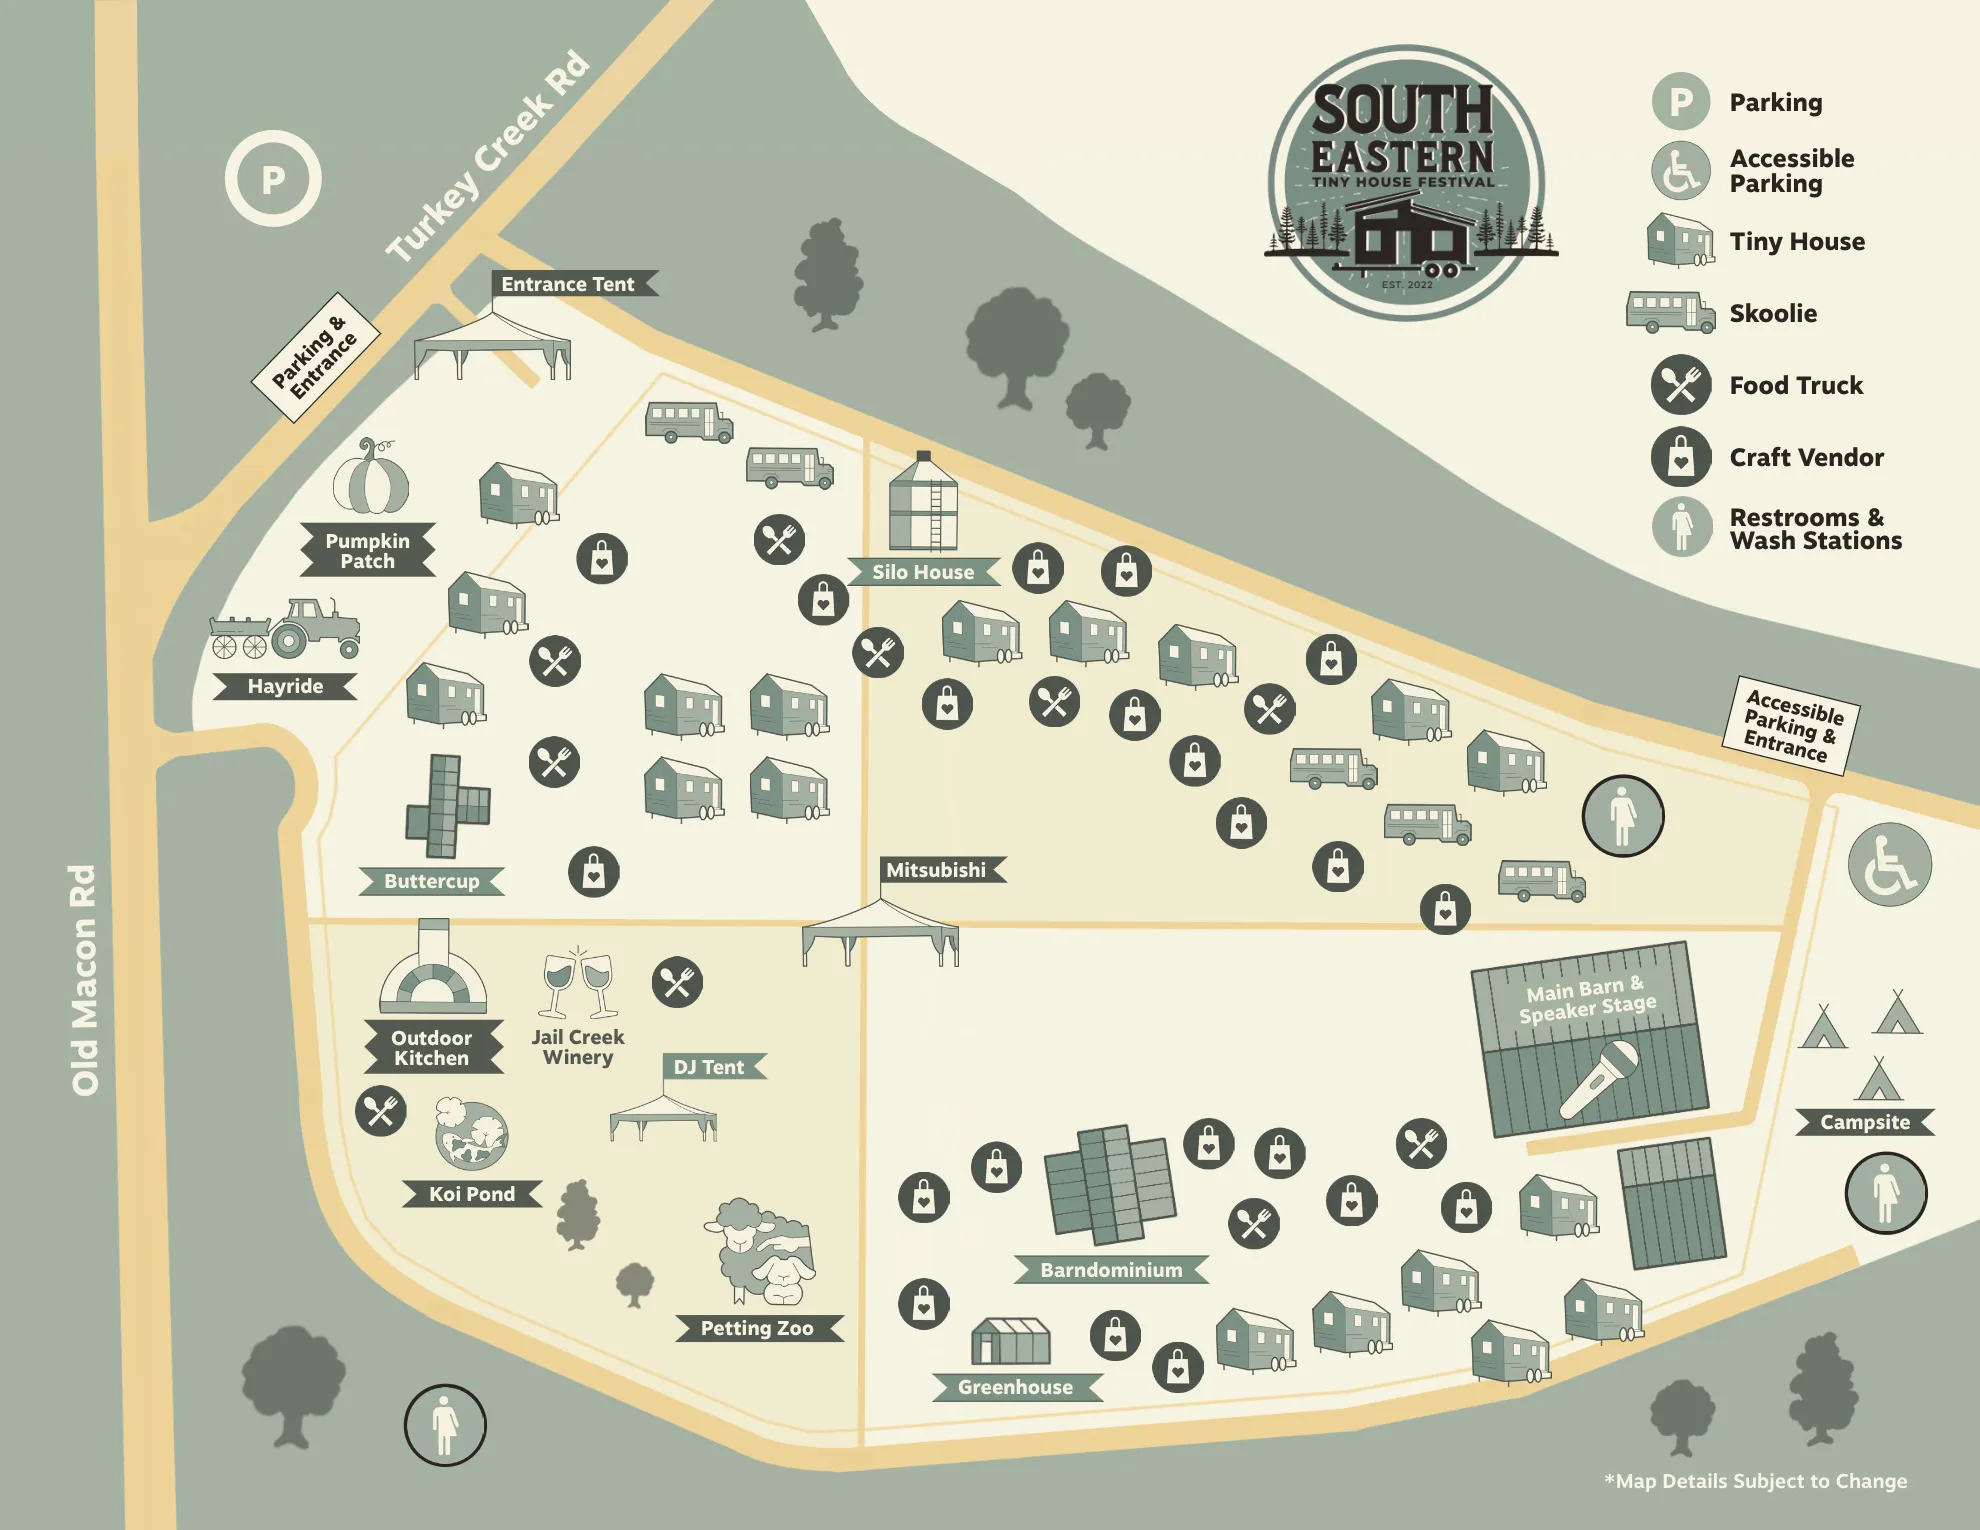 Overview map of the South Eastern TIny House Festival Grounds